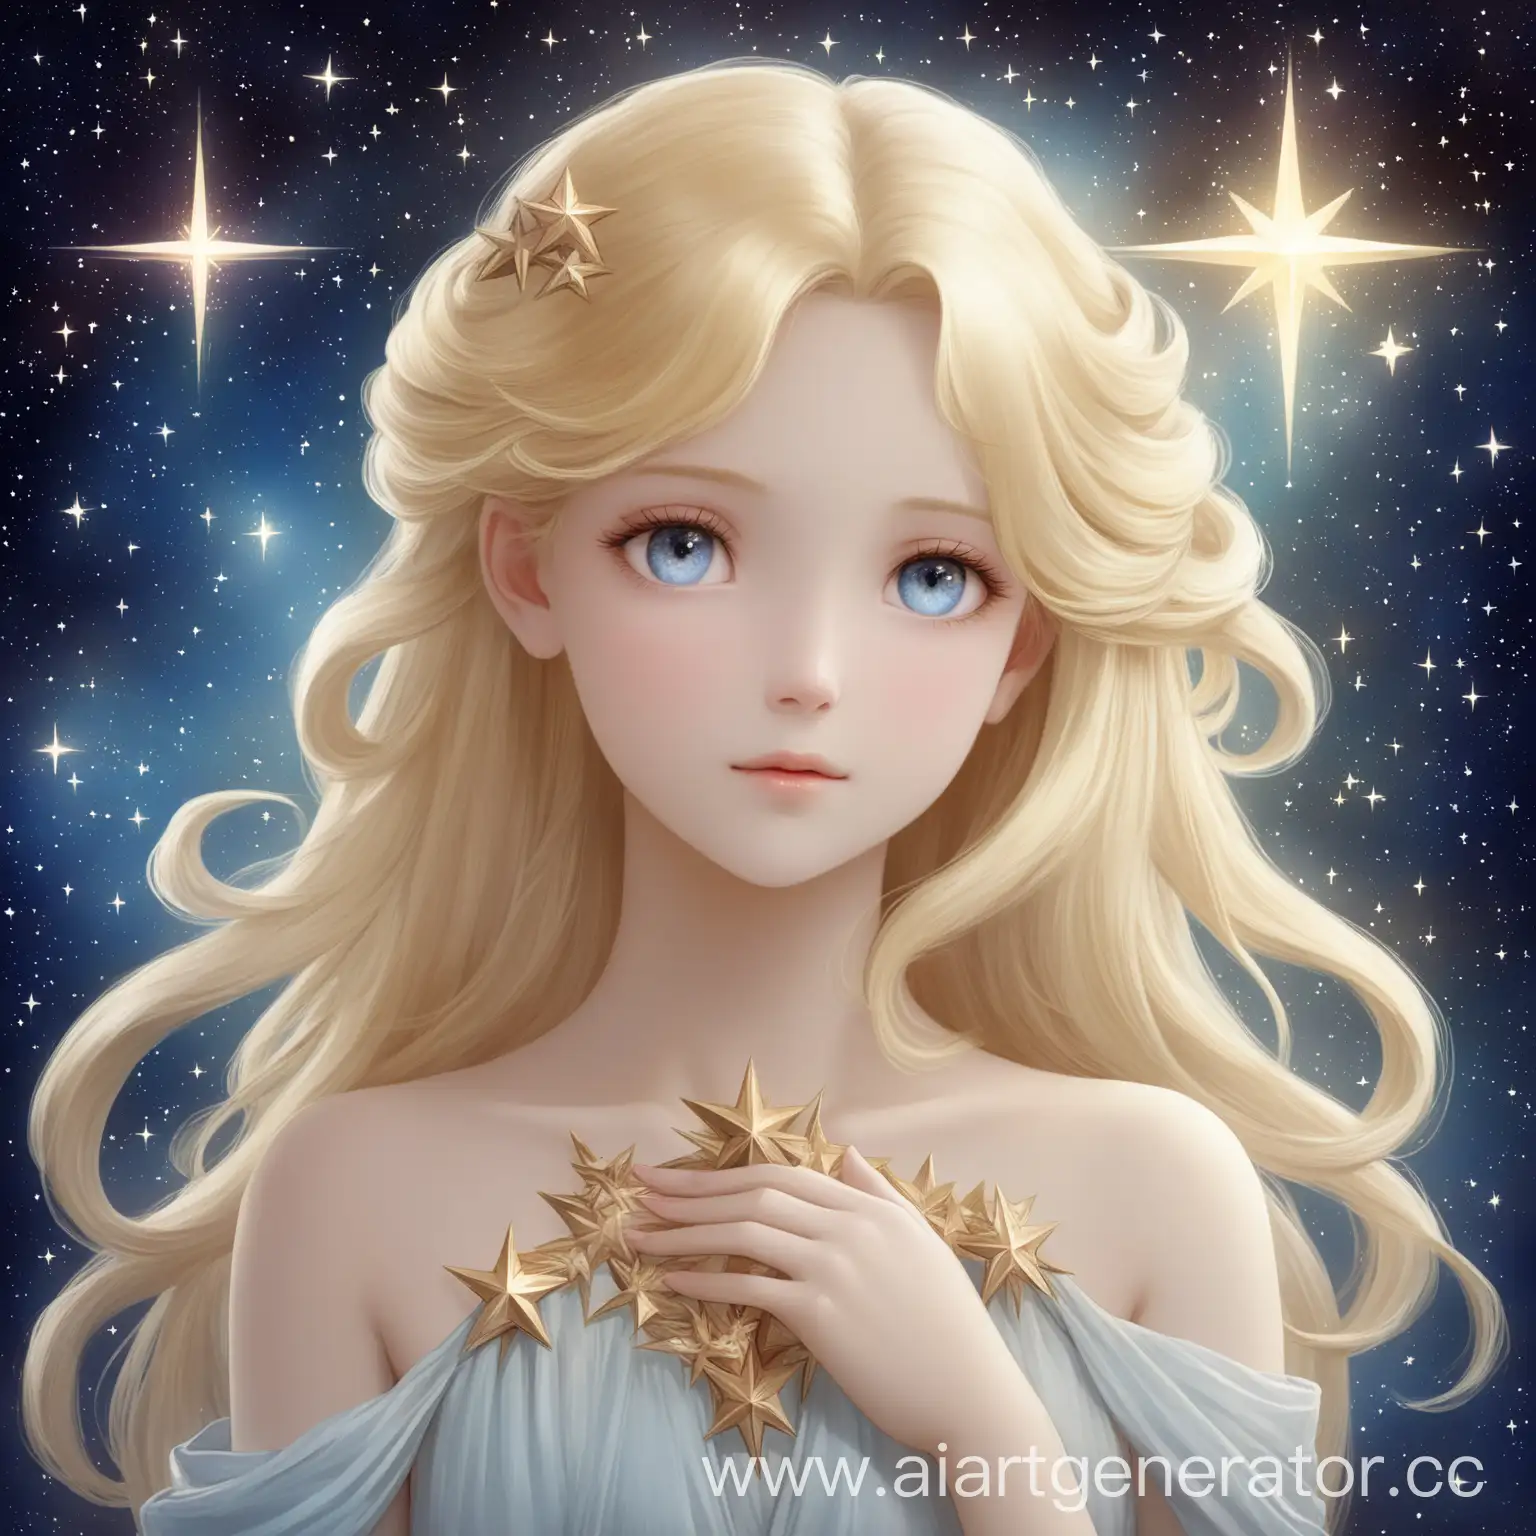 Goddess-of-the-Stars-Gentle-Girl-with-Soft-Affectionate-Look-and-Blond-Hair